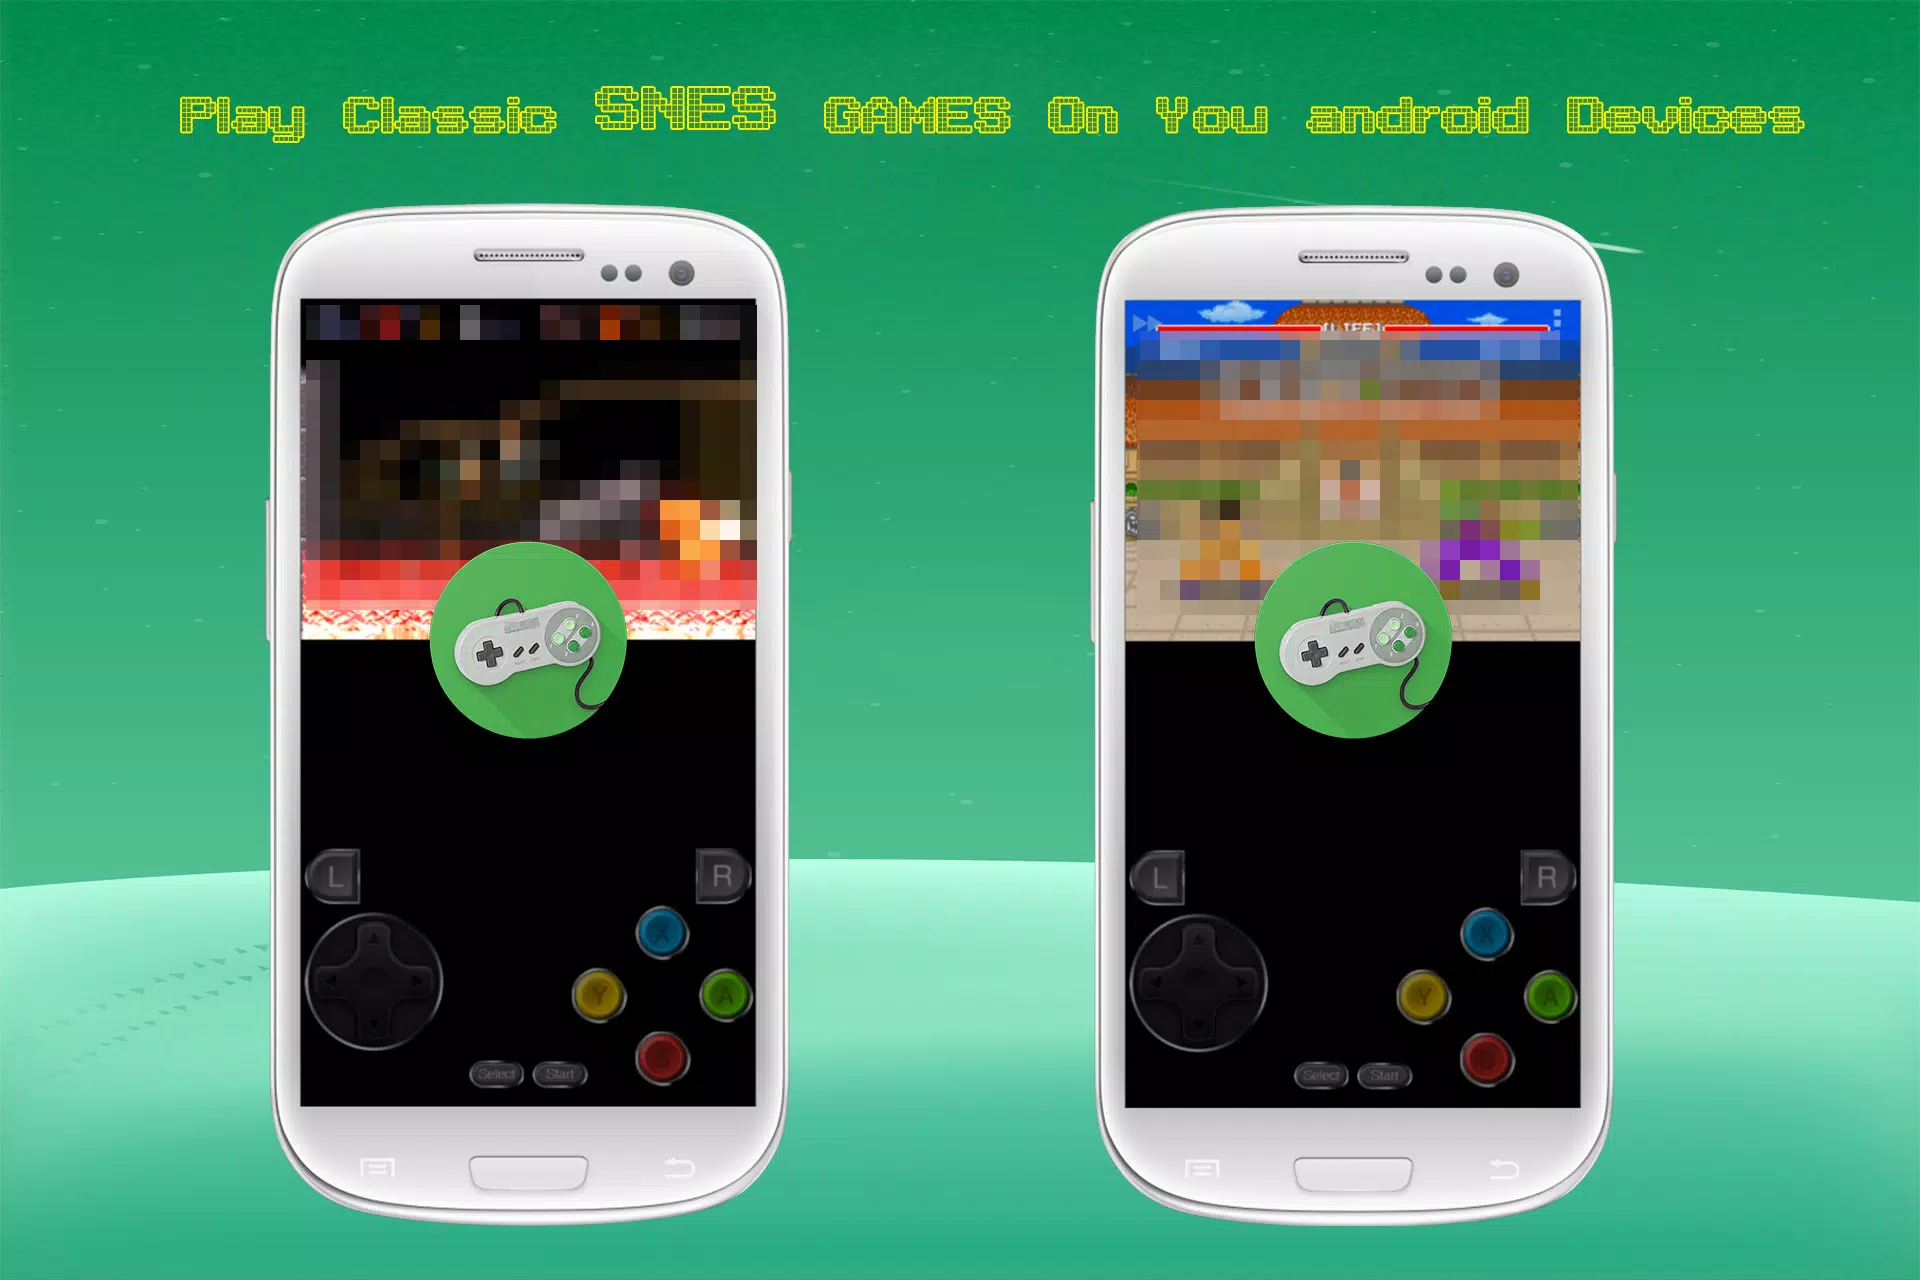 How to Play SNES Games on Android